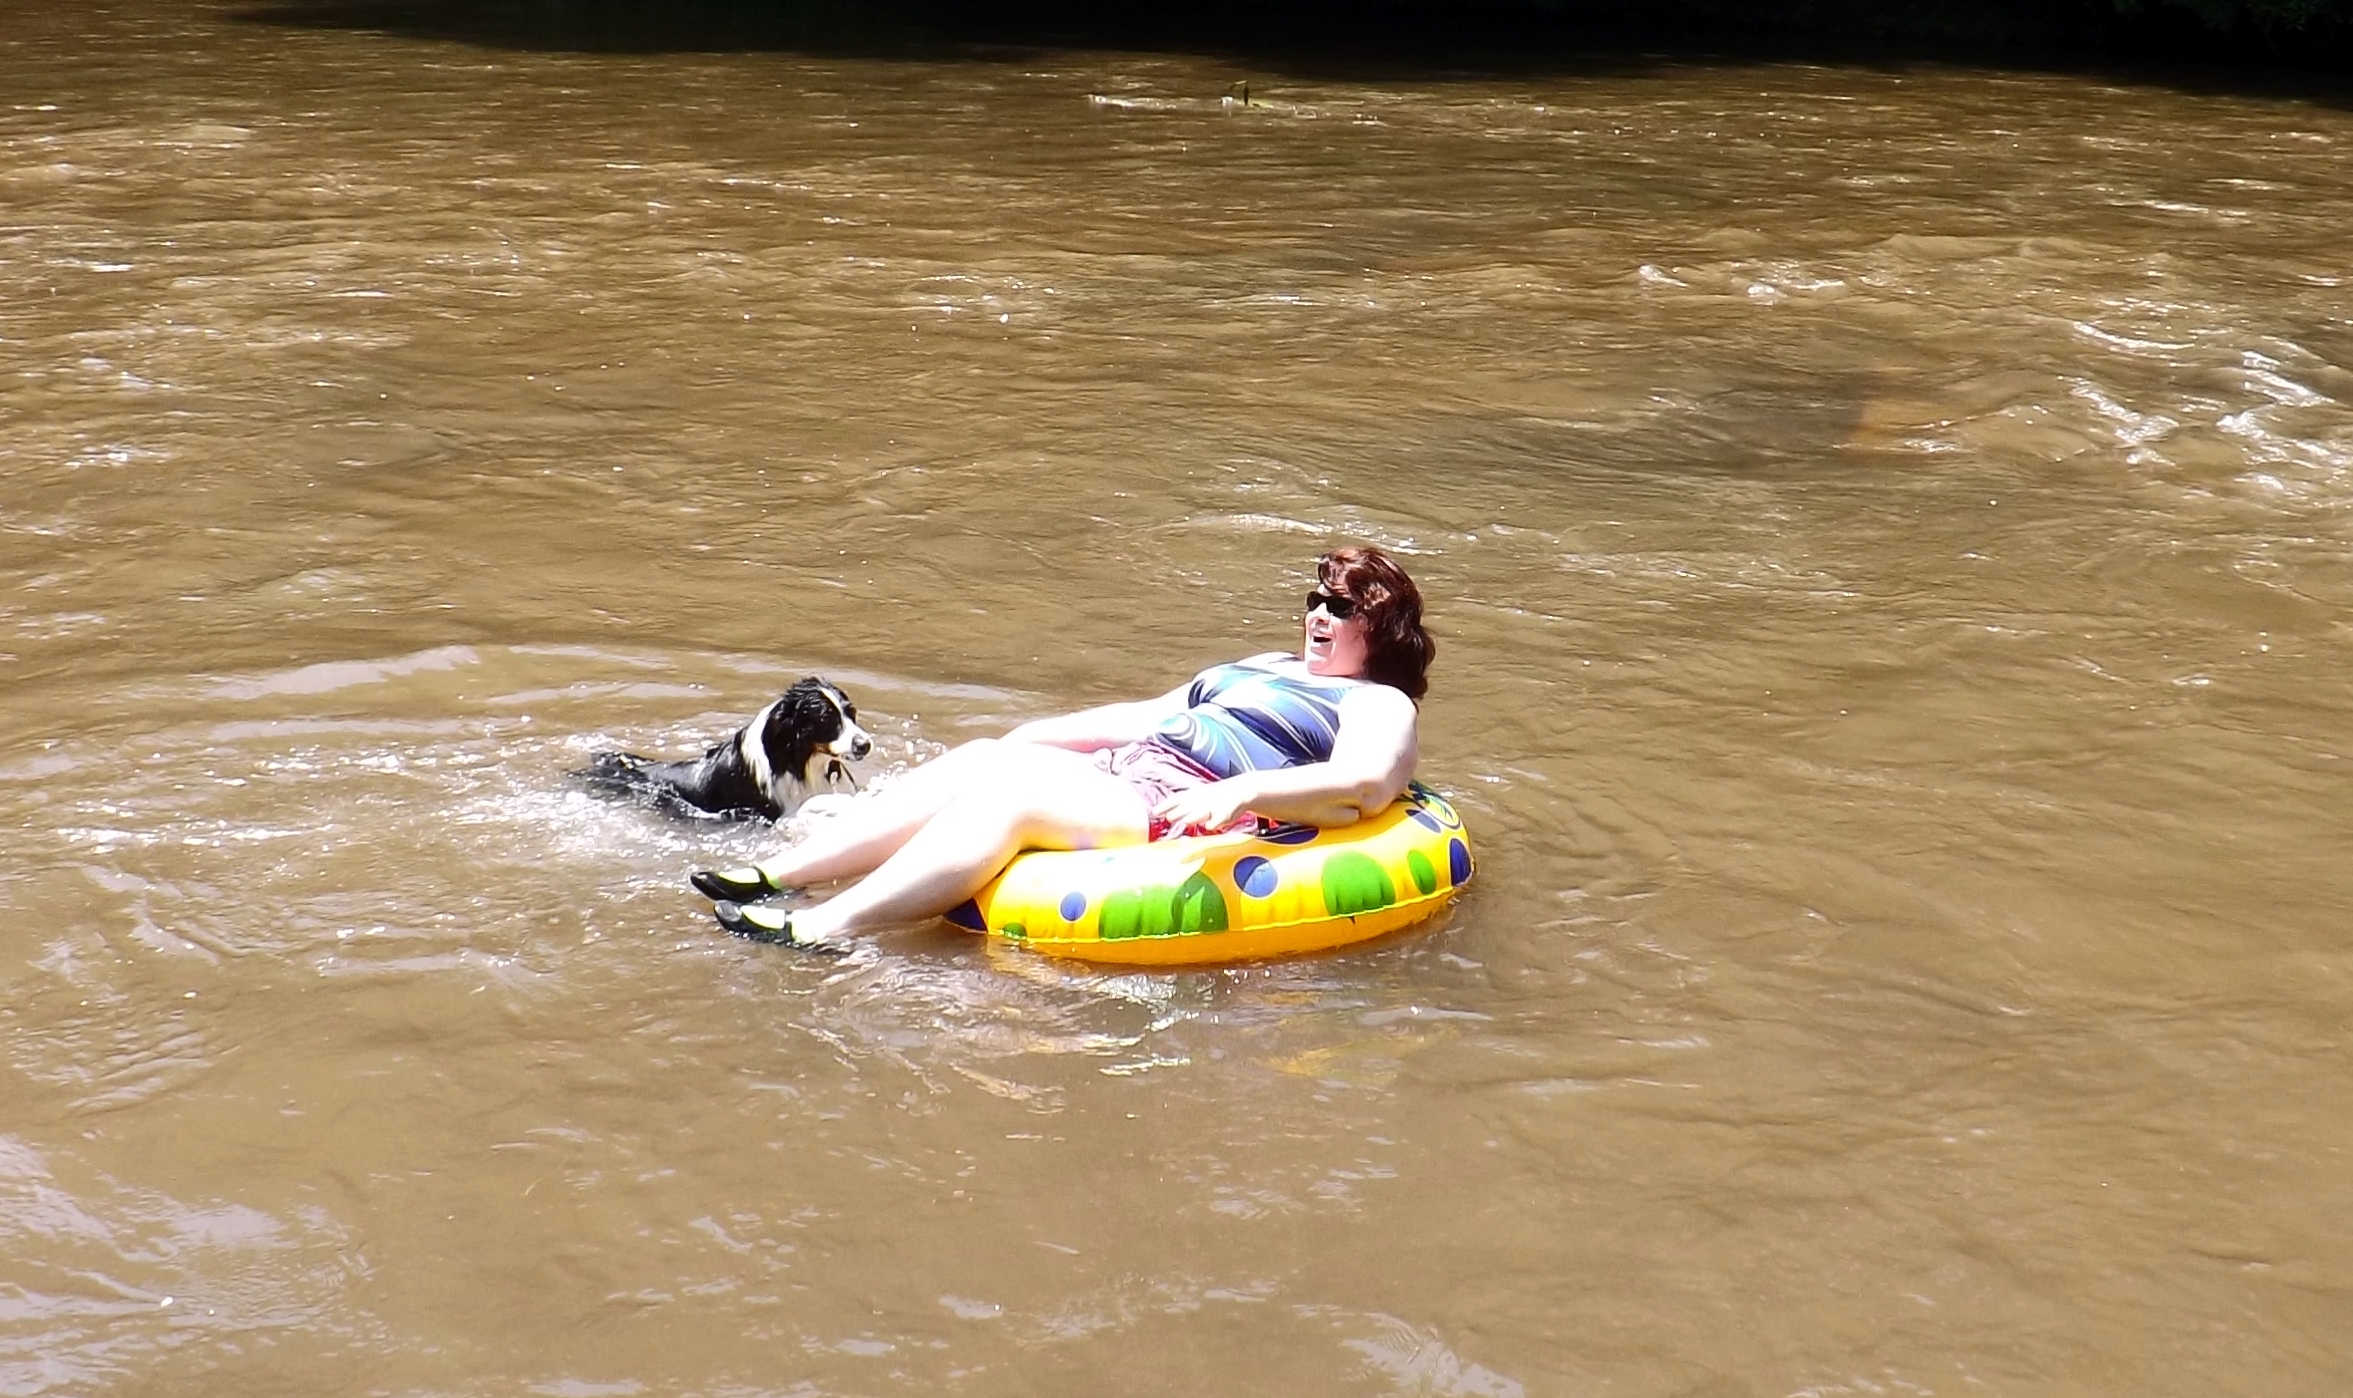 the girl is having fun floating in the brown water with her dog